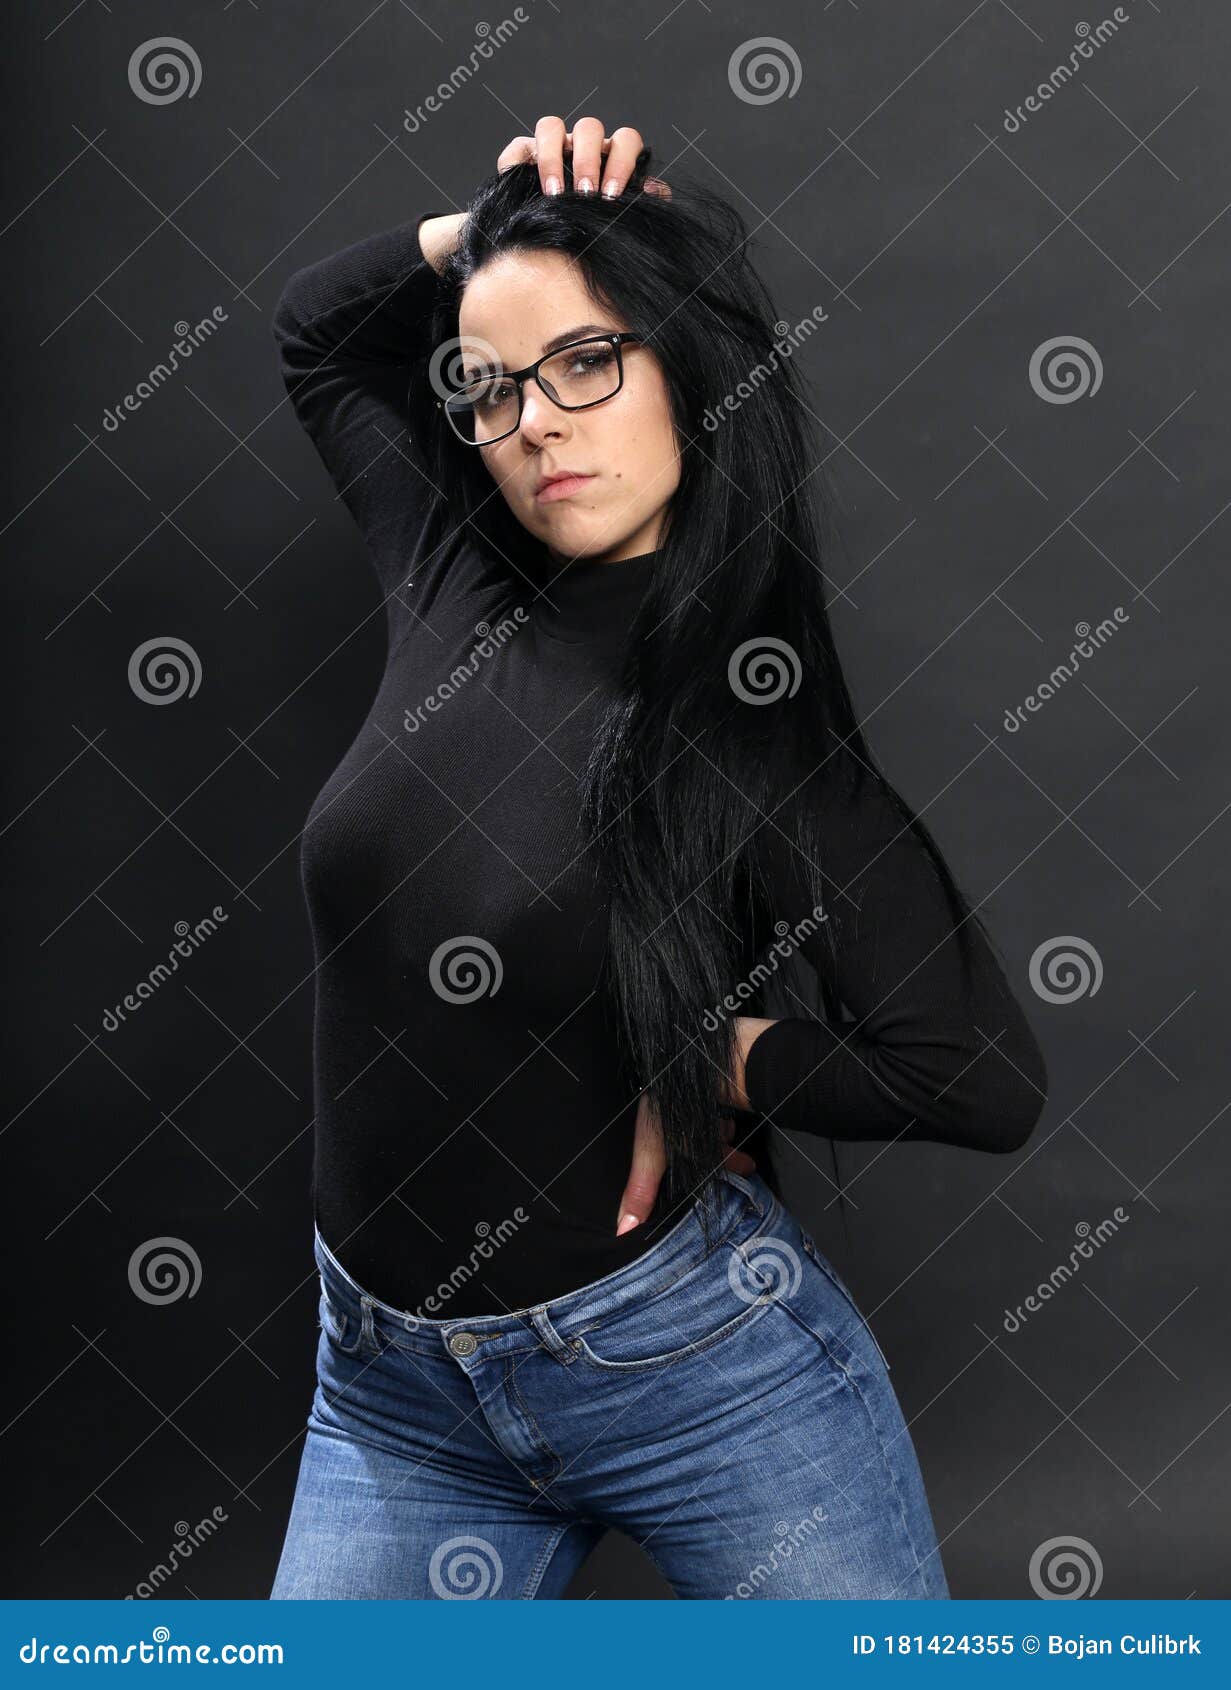 Attractive European Girl with Black Hair and Glasses Posing in Studio on  Isolated Background. Style, Trends, Fashion Concept. Stock Image - Image of  background, brunette: 181424355